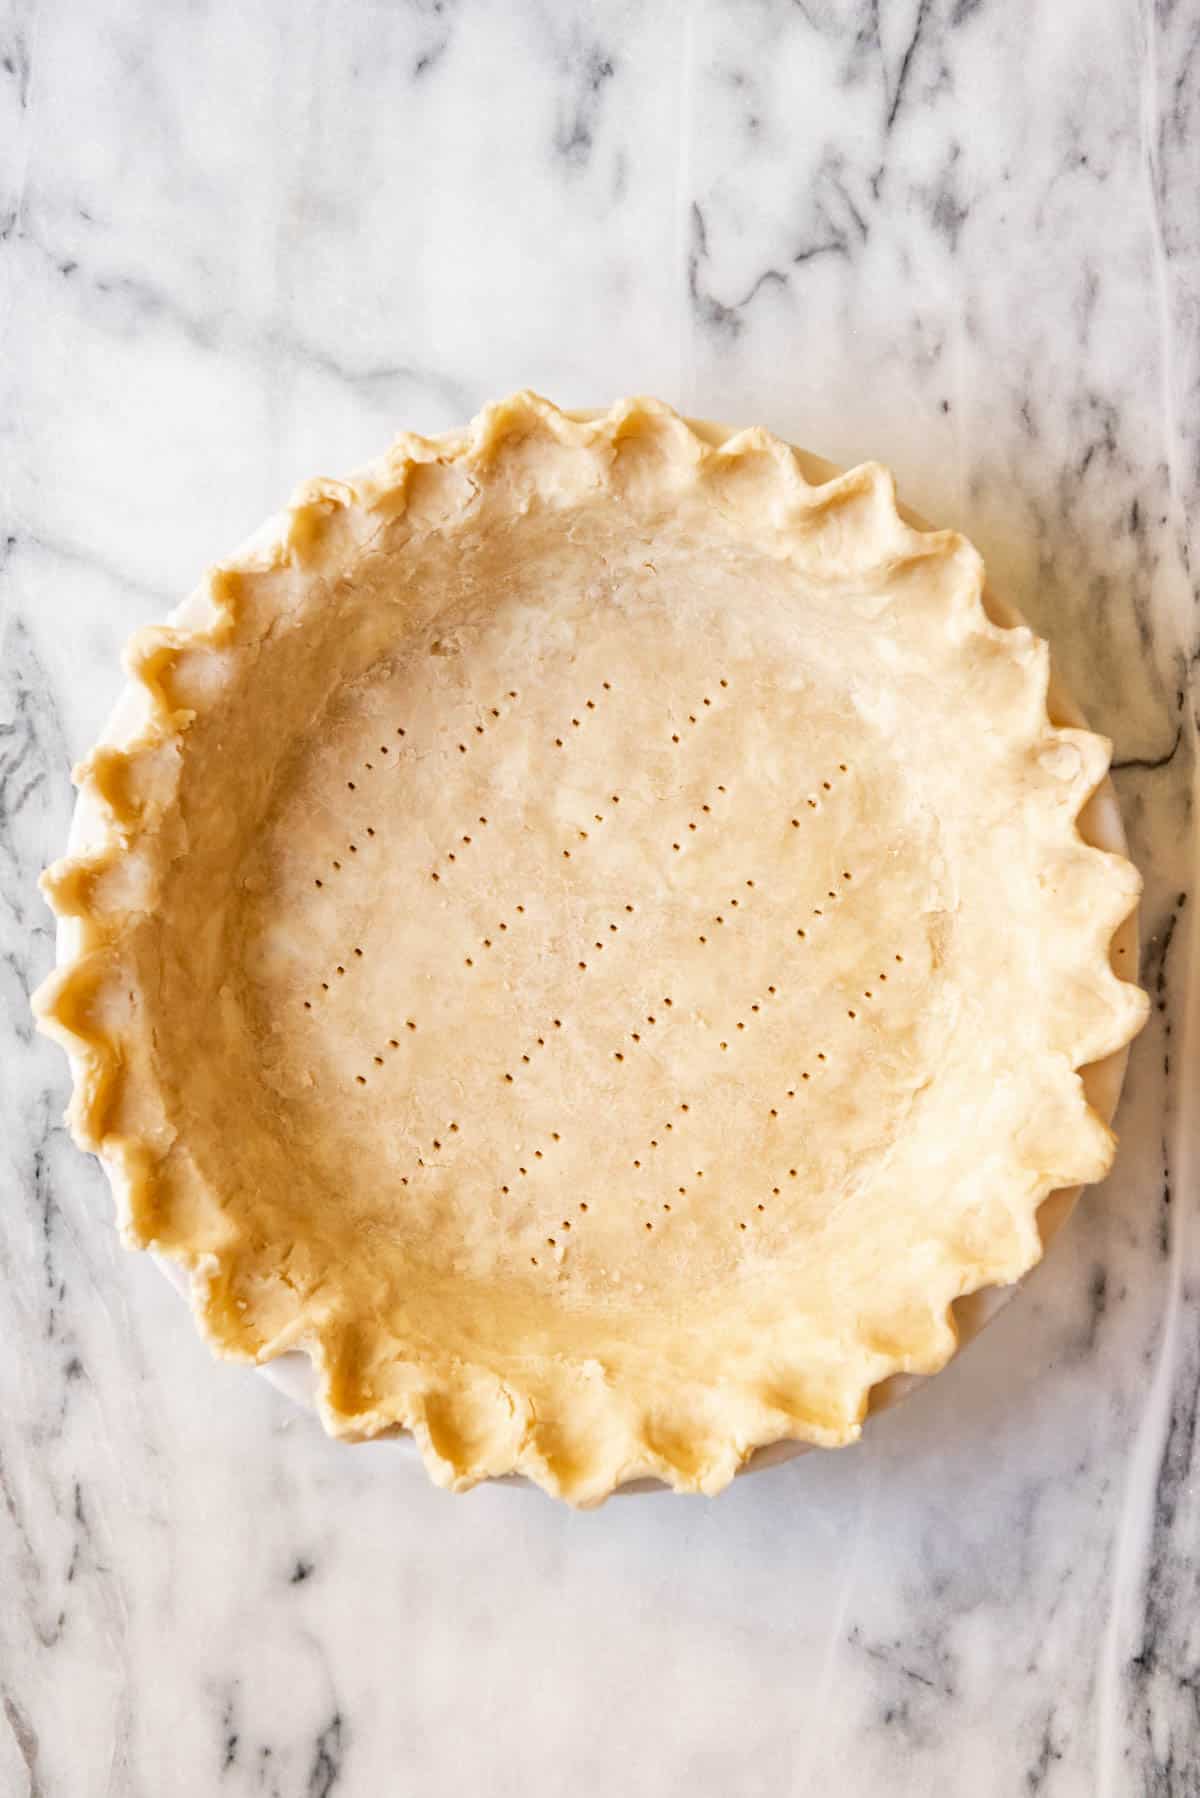 An image of an unbaked pie crust with fork marks on the bottom to blind bake the crust.